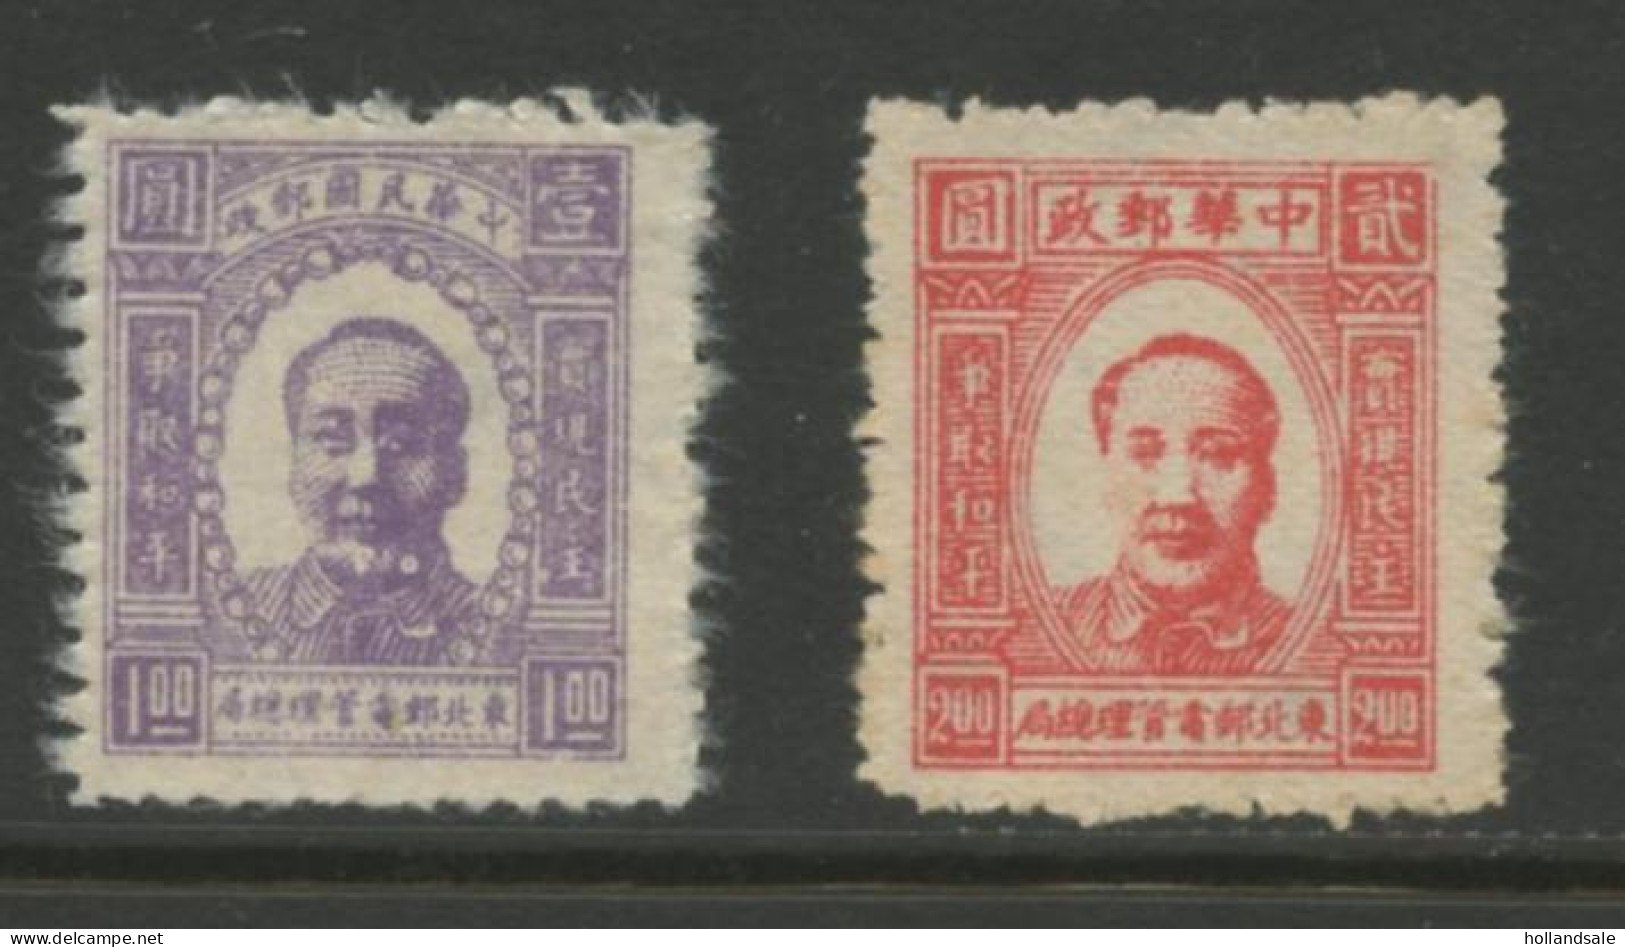 CHINA NORTH EAST - 1946 MICHEL # 1 And # 2. Both Unused. - Chine Du Nord-Est 1946-48